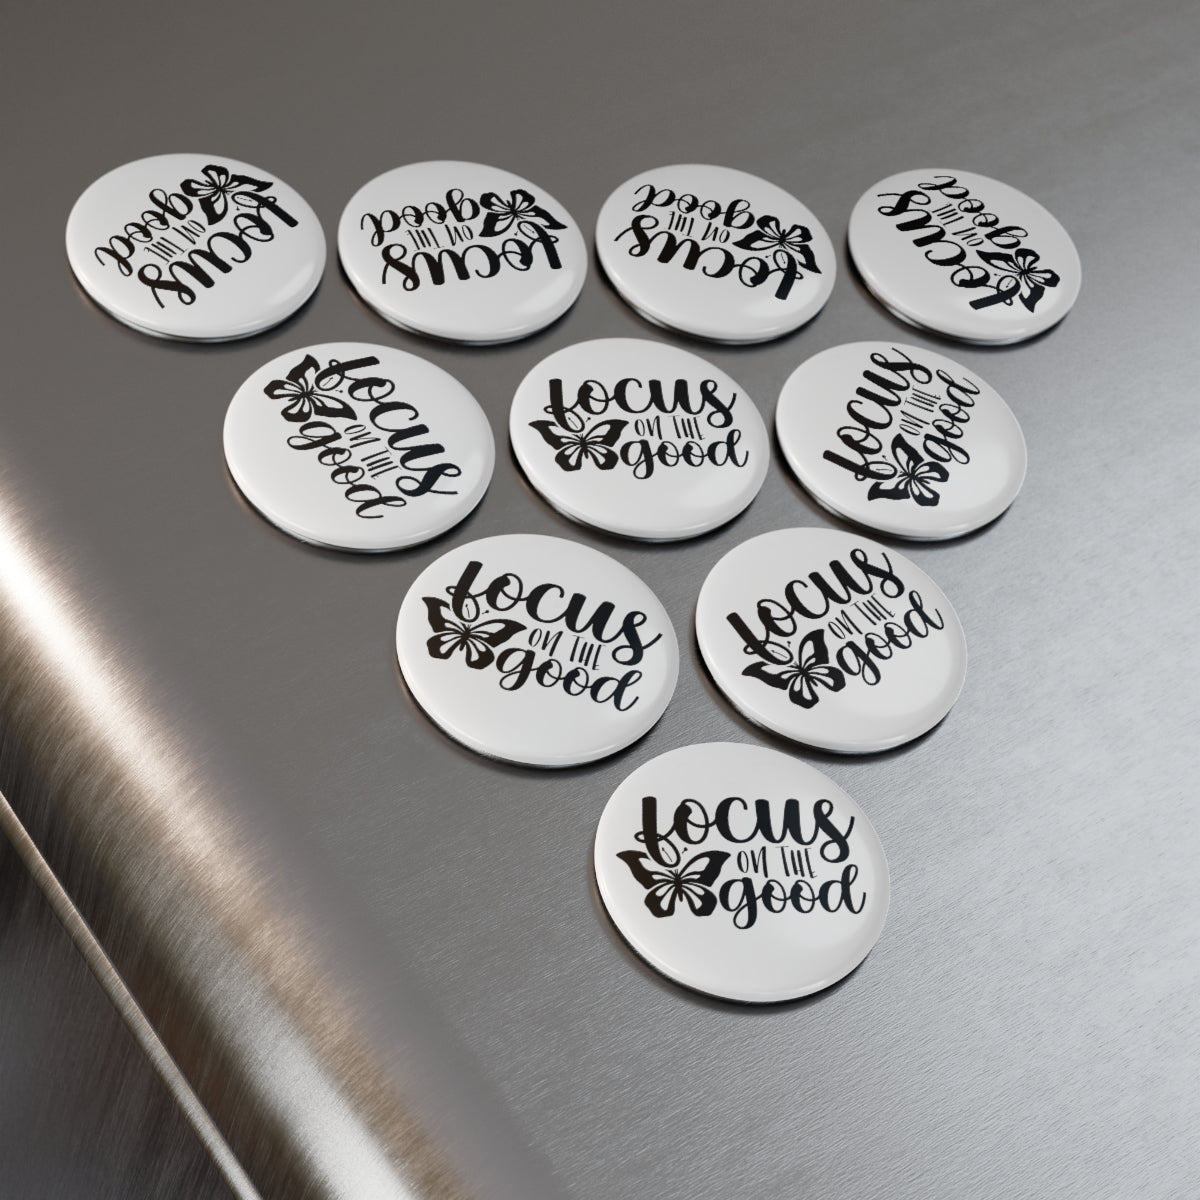 Focus on the good Button Magnet, Round (1 & 10 pcs)